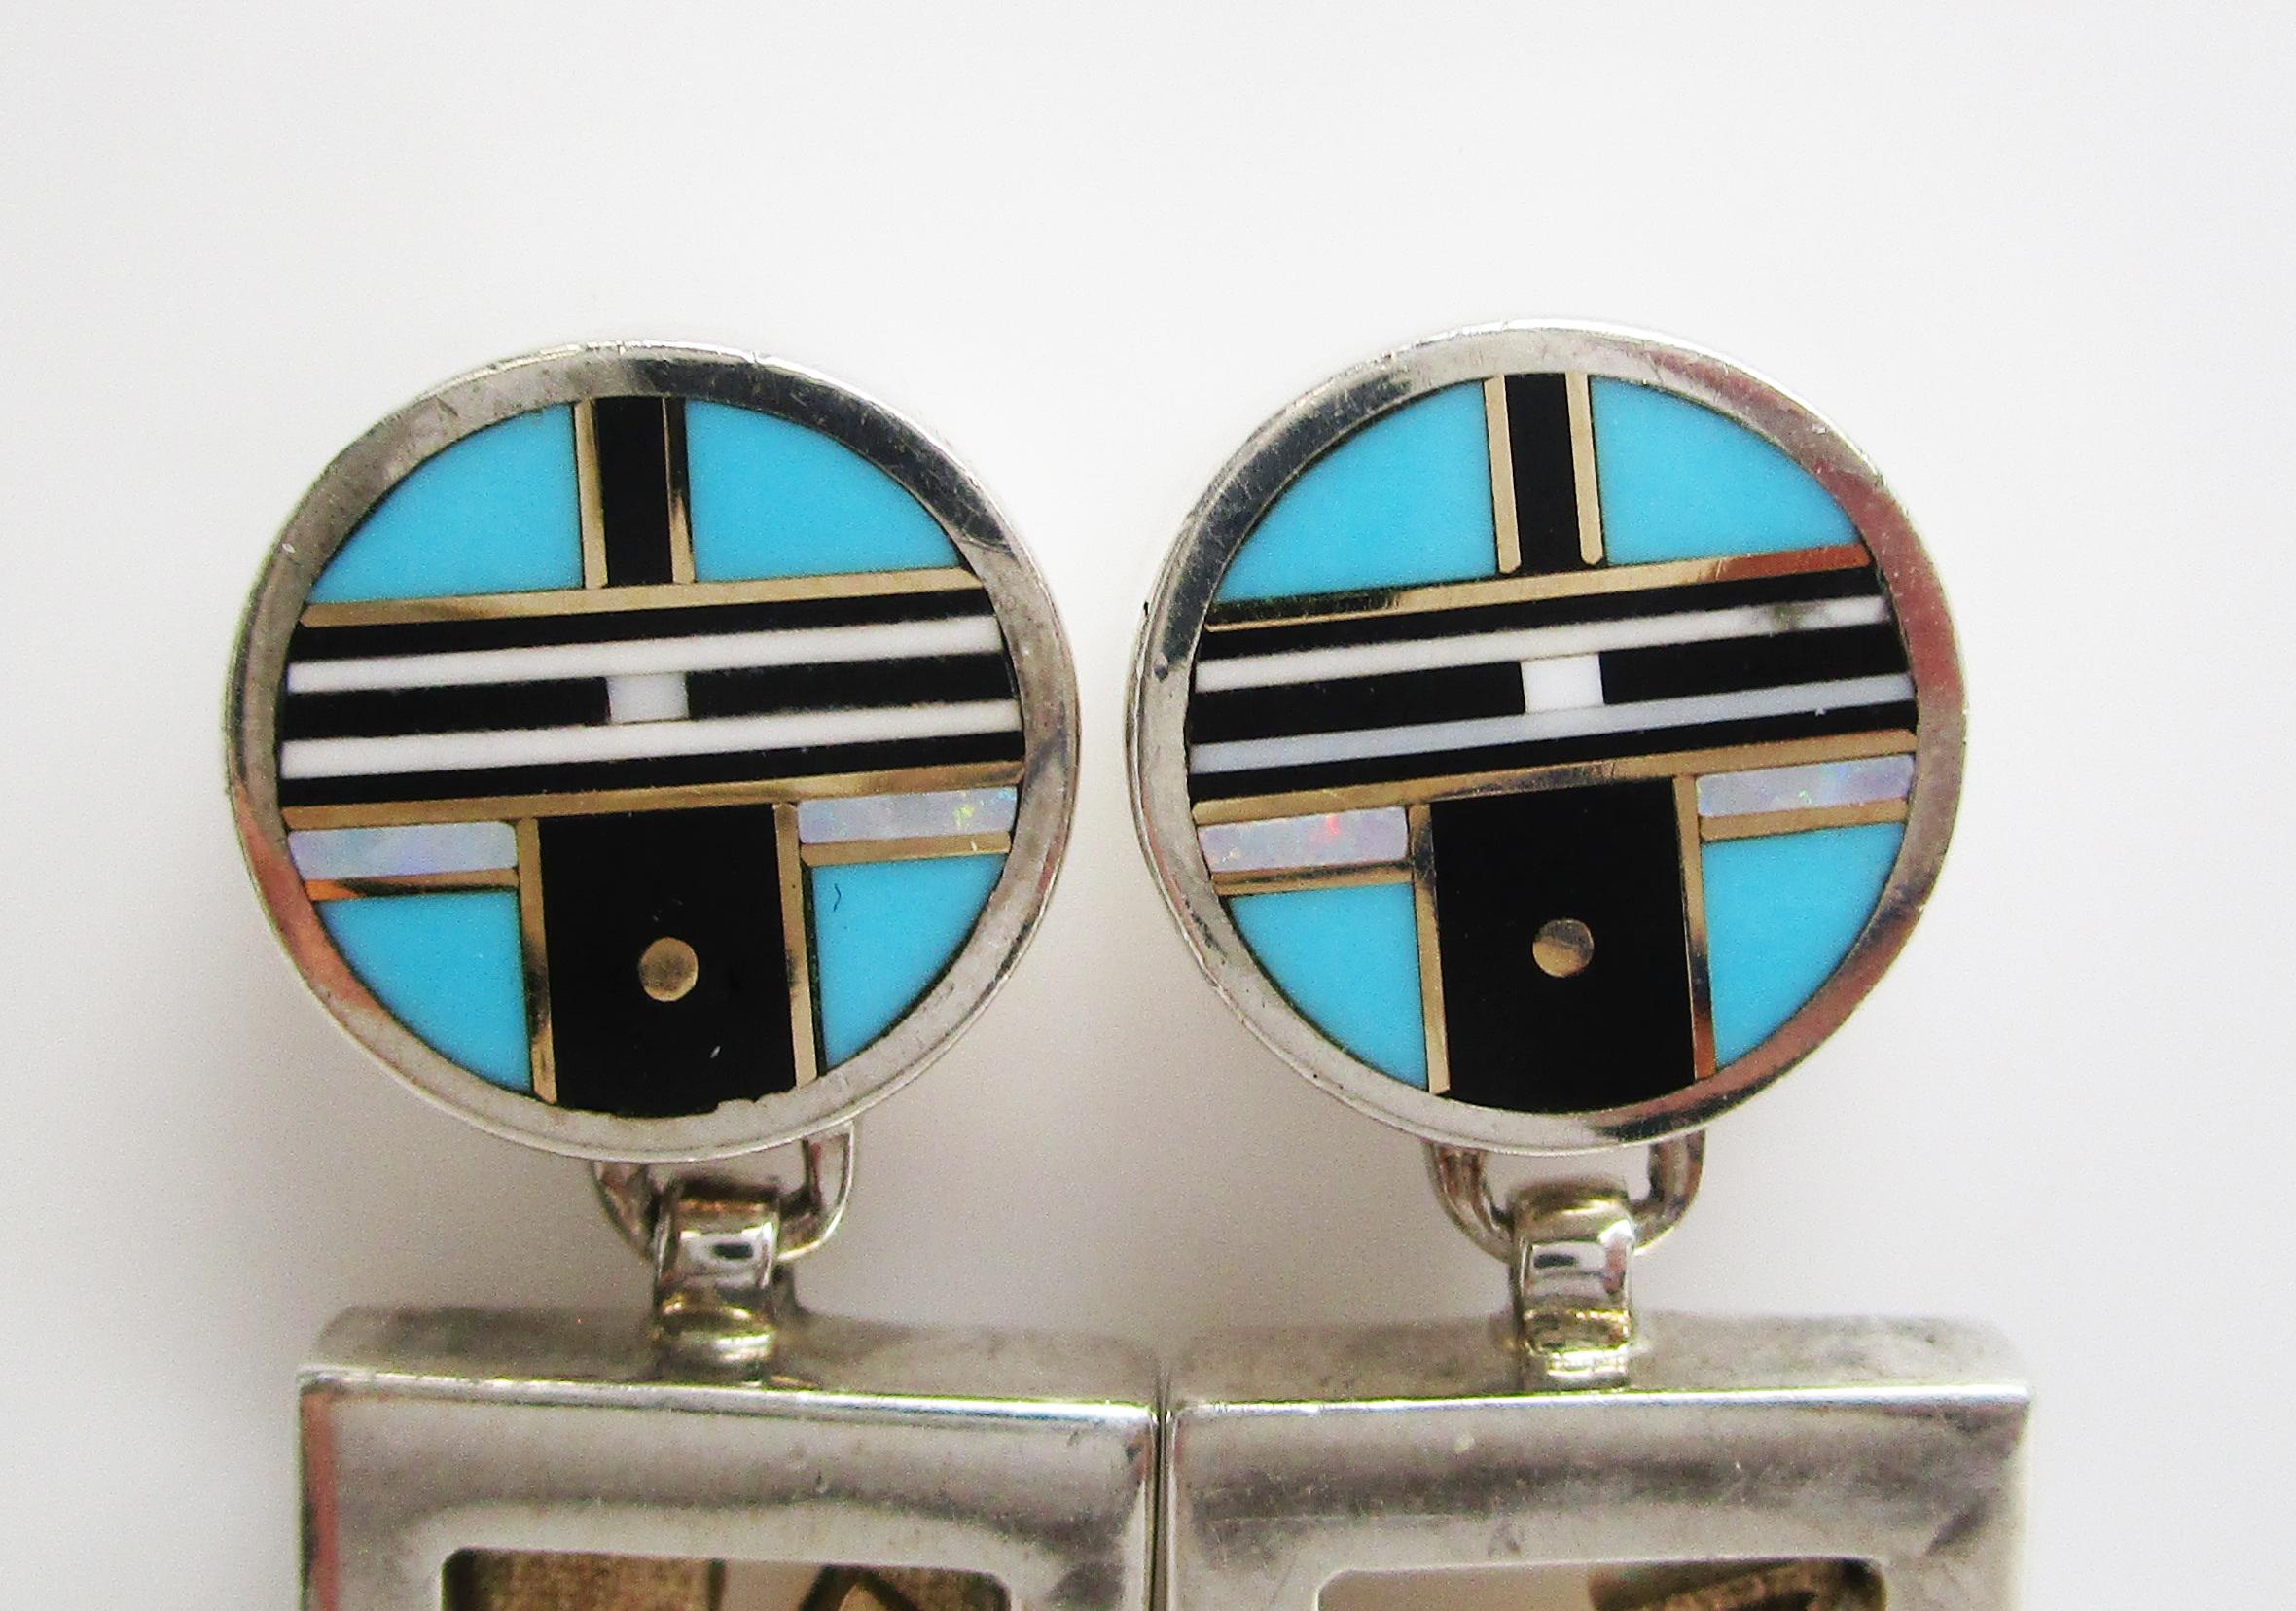 This is a great pair of Navajo earrings by Robert Taylor II in sterling silver and 14k yellow gold. The dangle earrings have a two-part articulated layout that creates fantastic movement! The upper portion of the earring features a geometric design